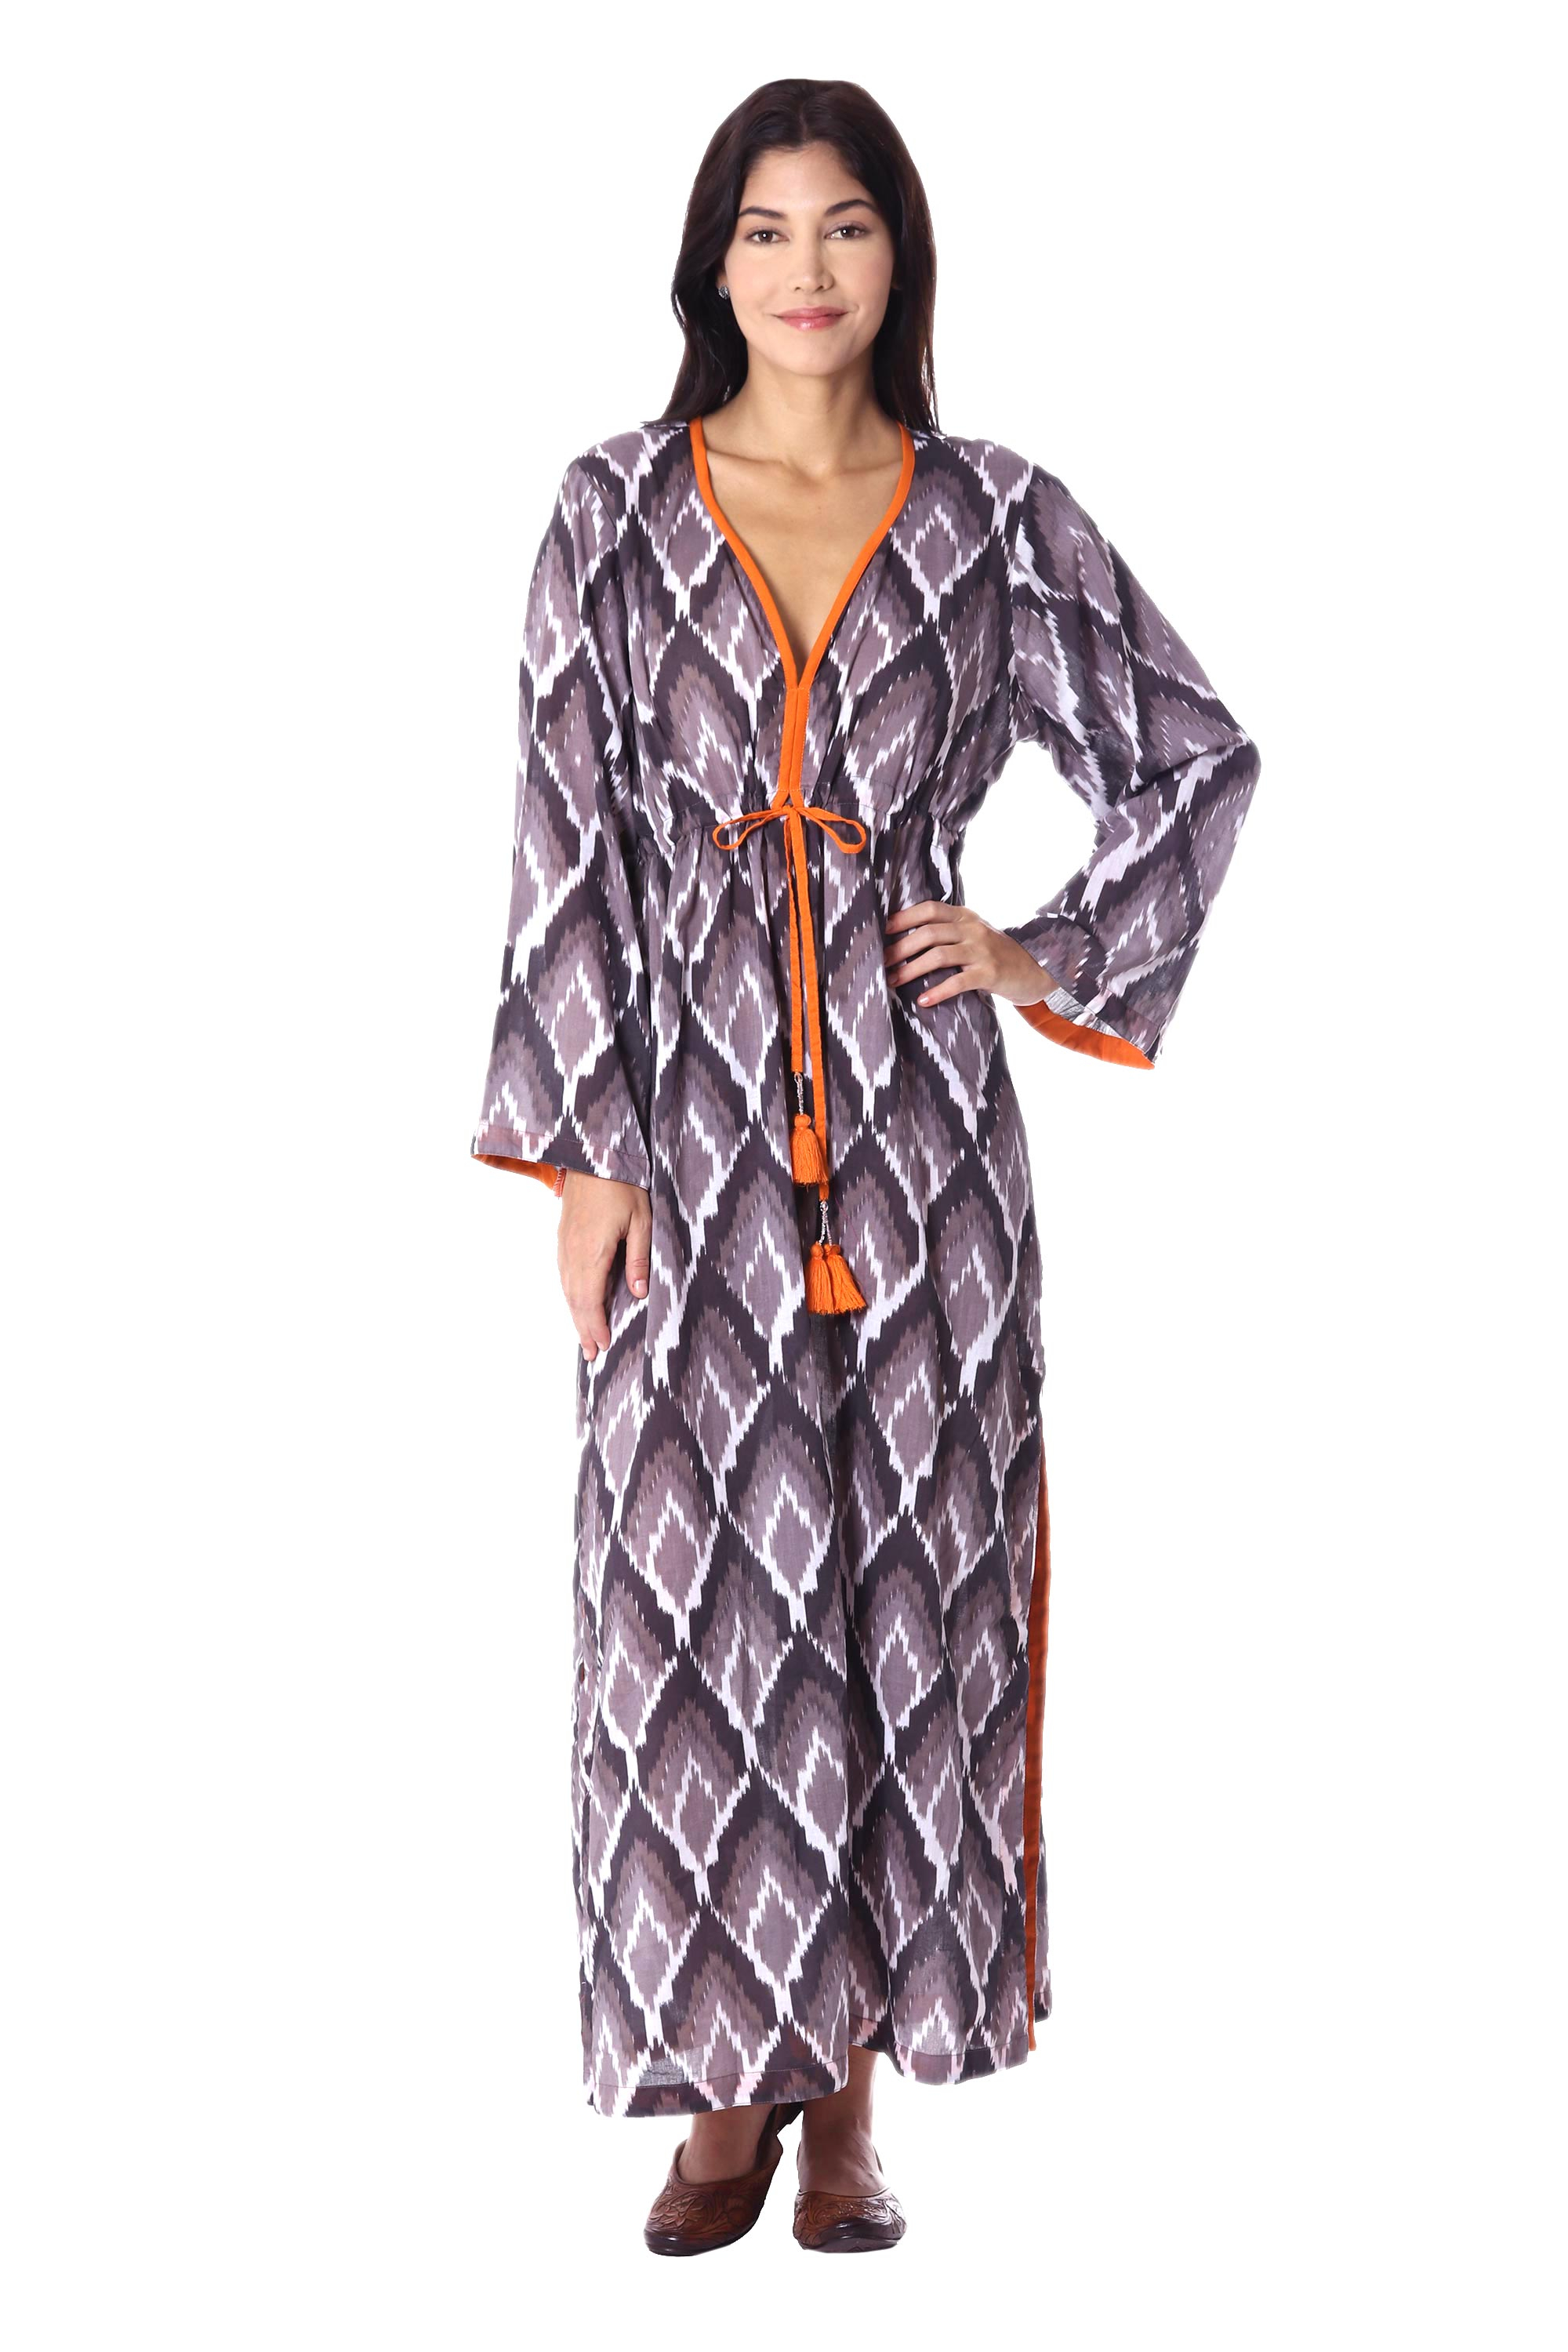 Grey and White Print 100% Cotton Long Sleeve Maxi Dress - Flames of ...